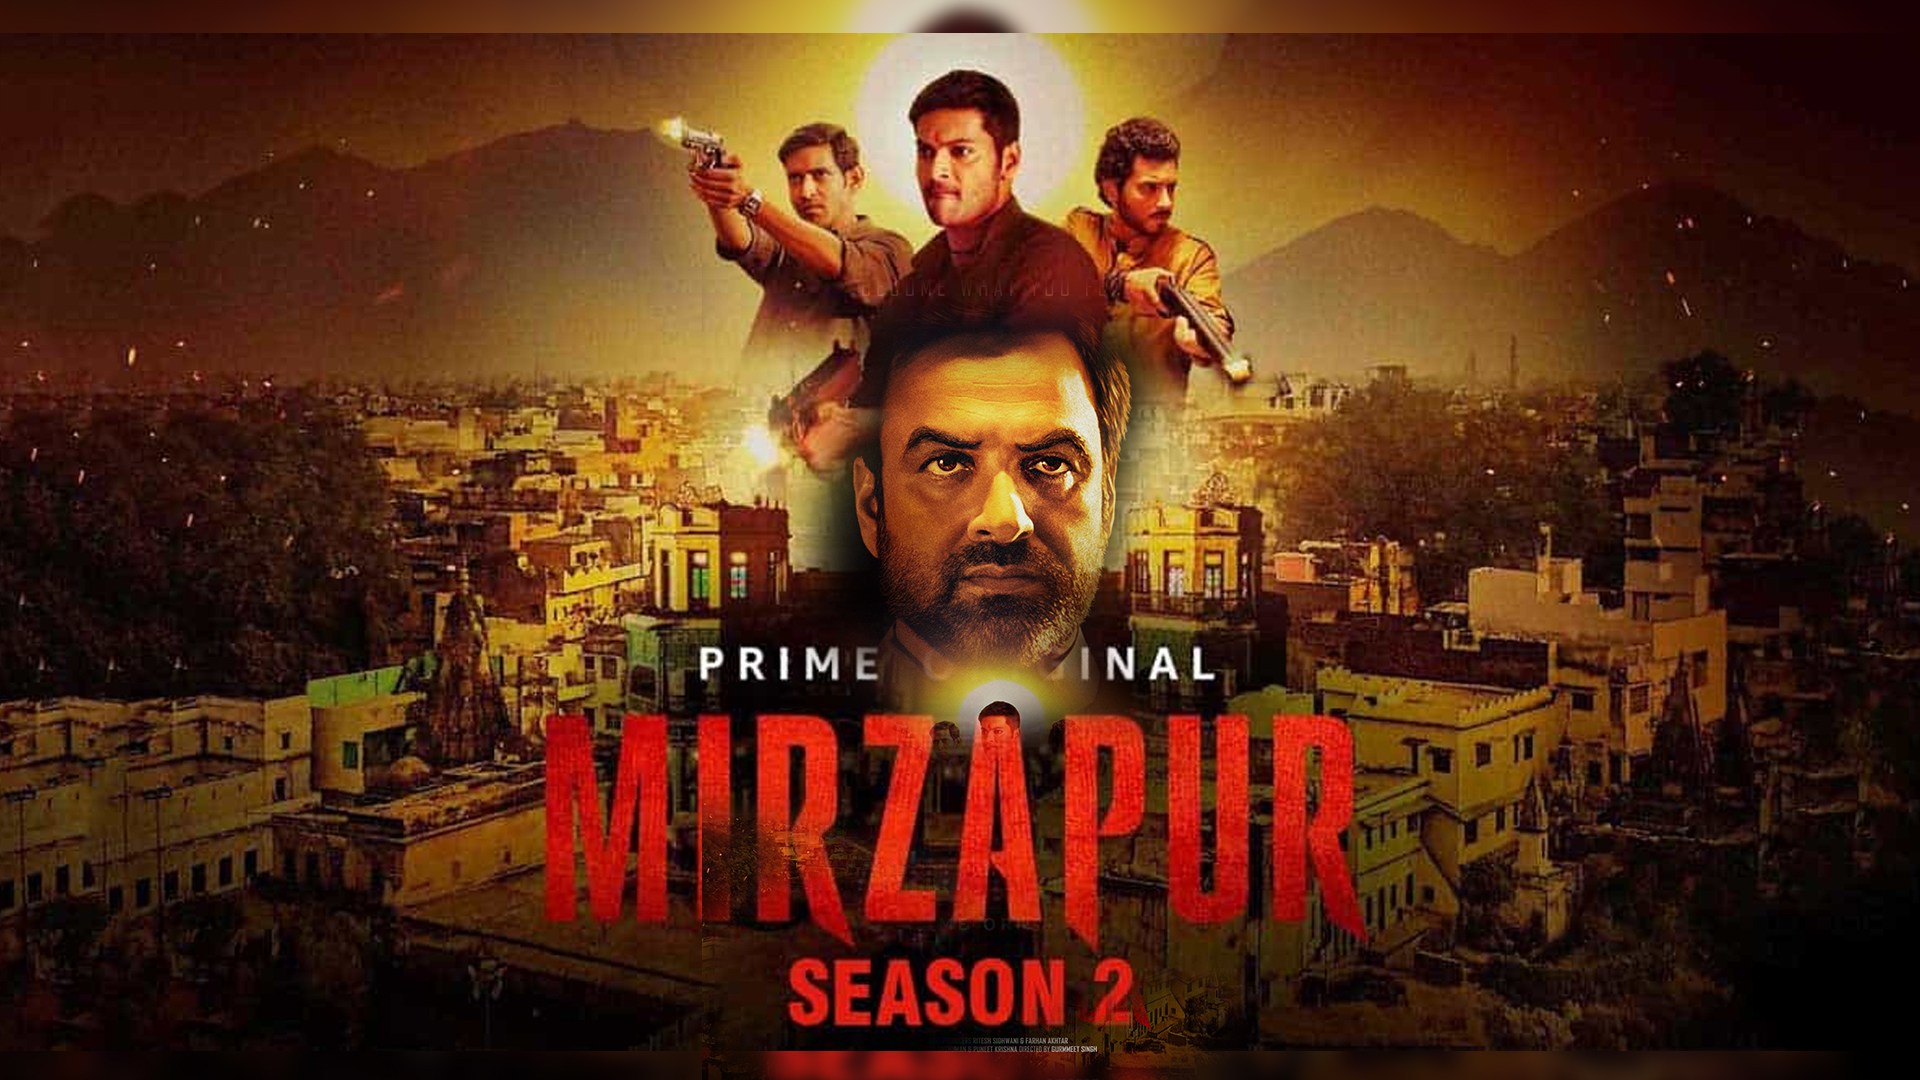 Mirzapur Season 2 On Amazon Prime Confirmed? Release Date,Story, Cast